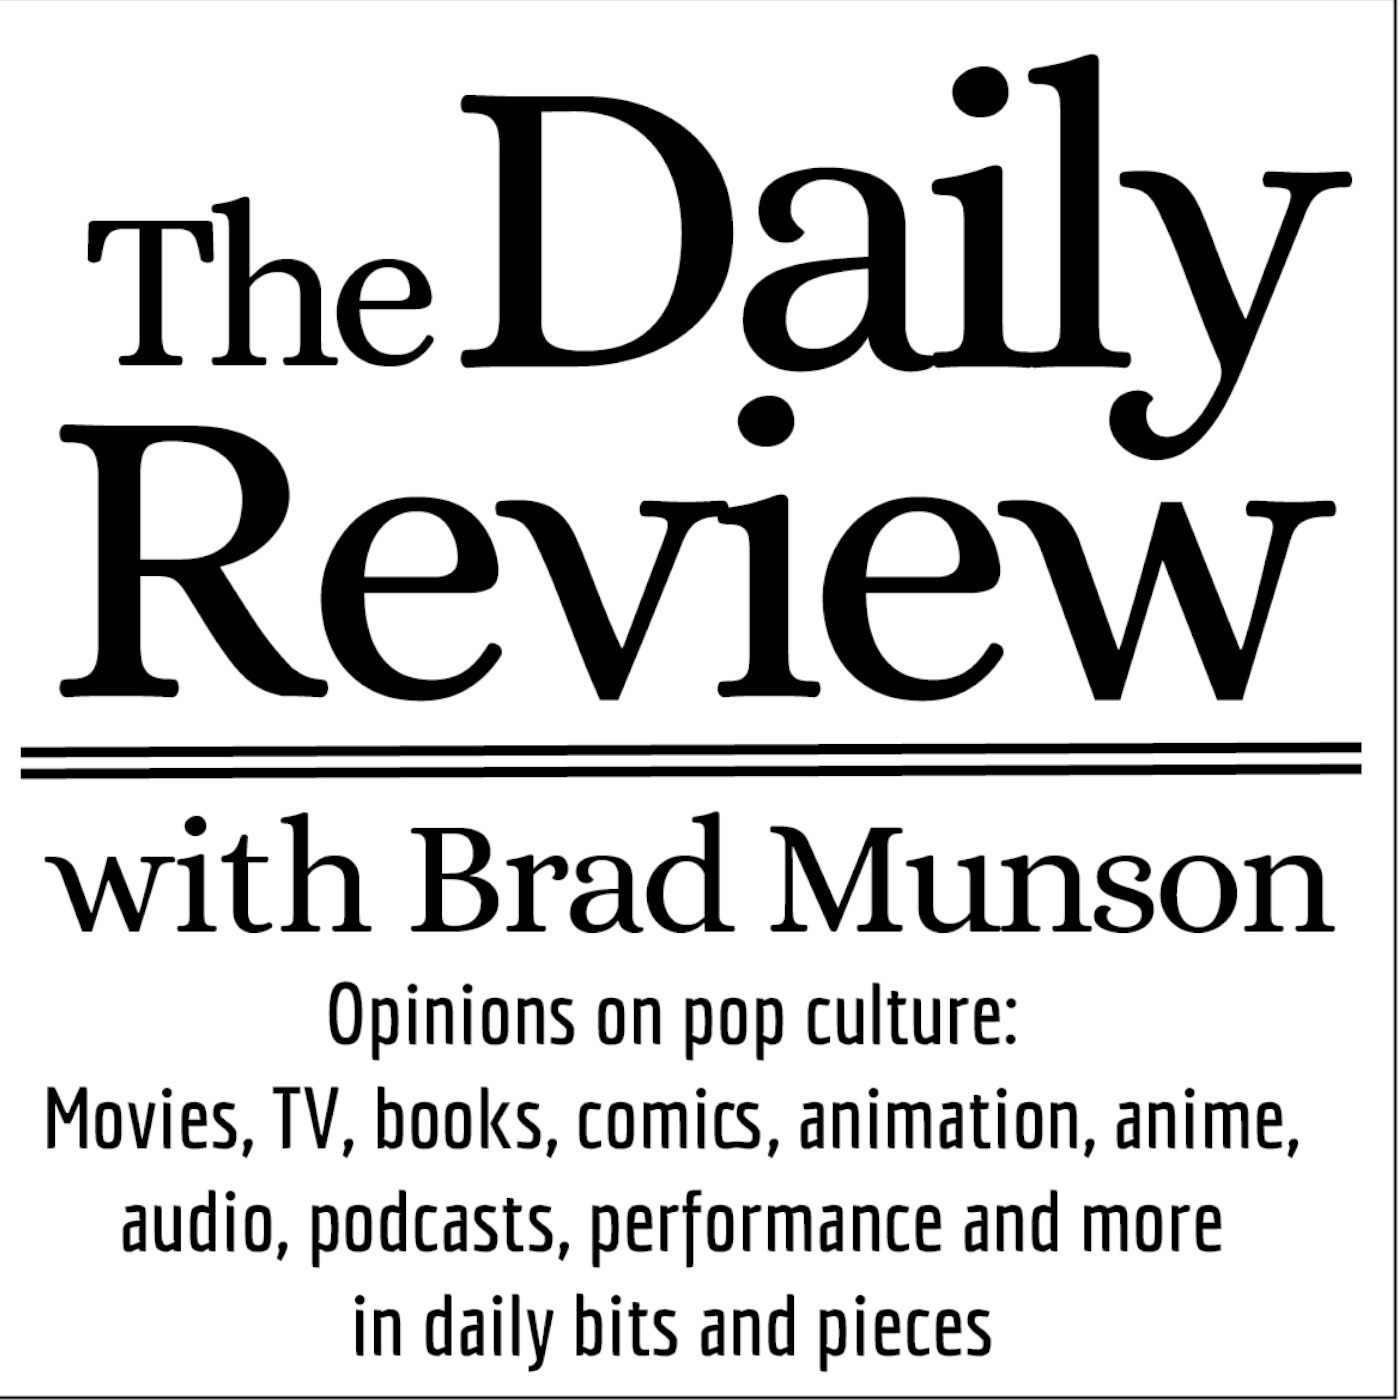 The Daily Review